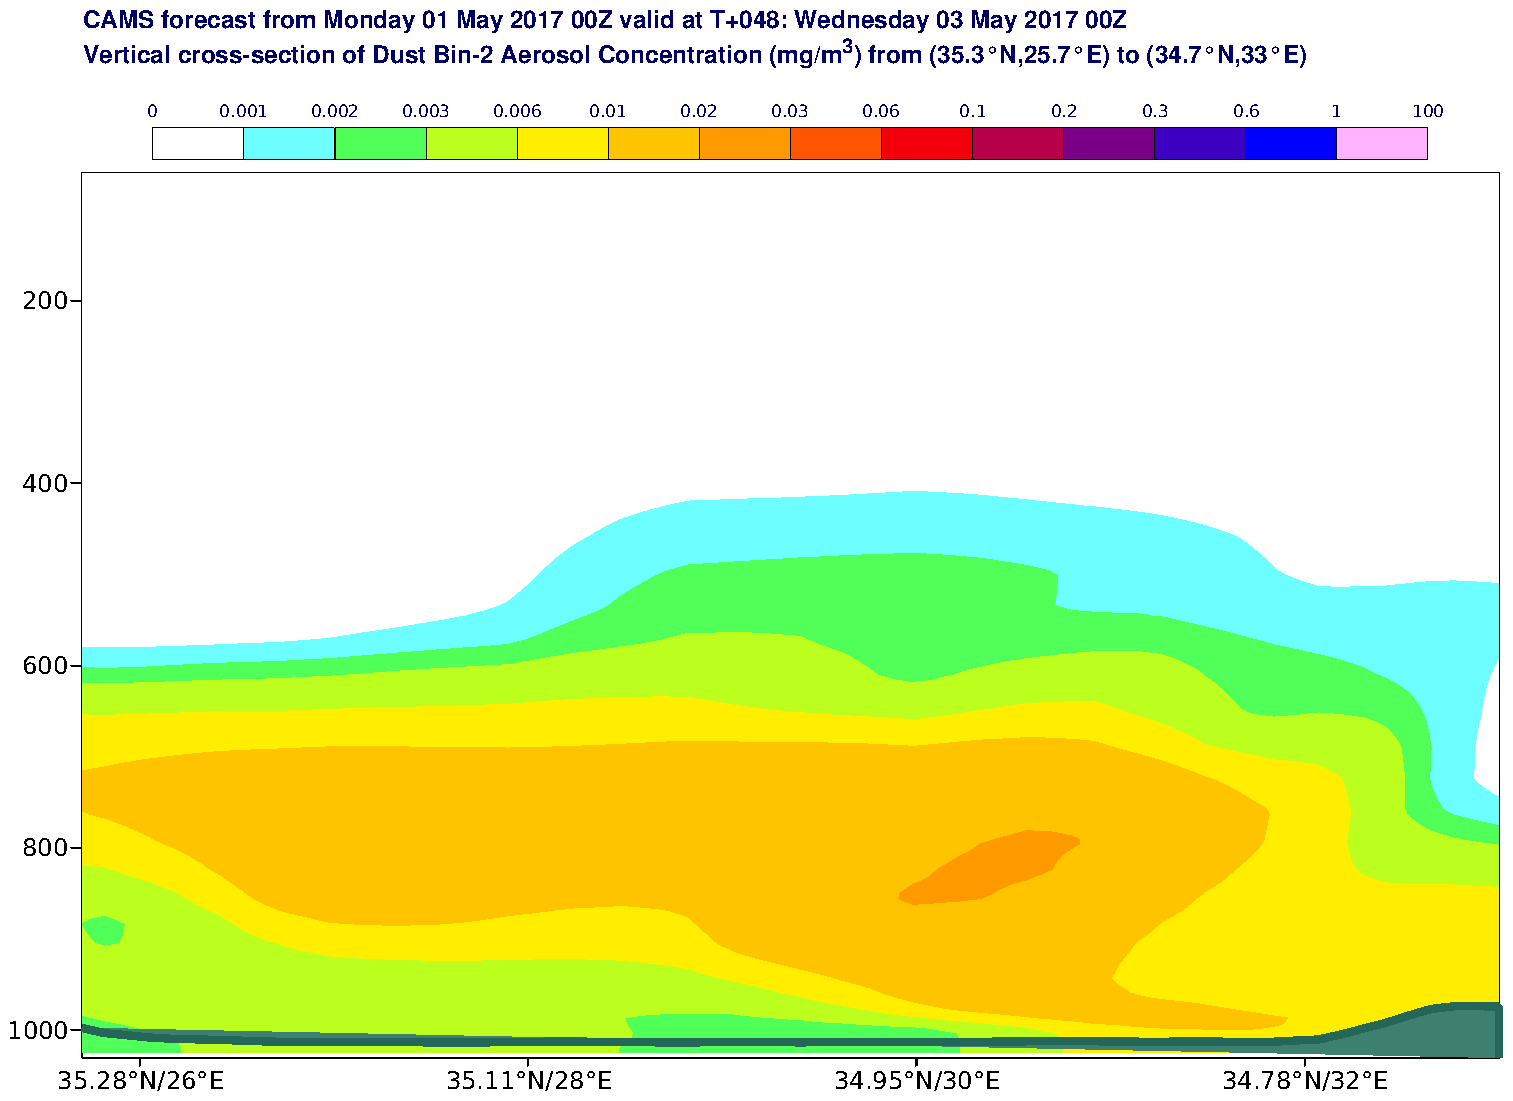 Vertical cross-section of Dust Bin-2 Aerosol Concentration (mg/m3) valid at T48 - 2017-05-03 00:00